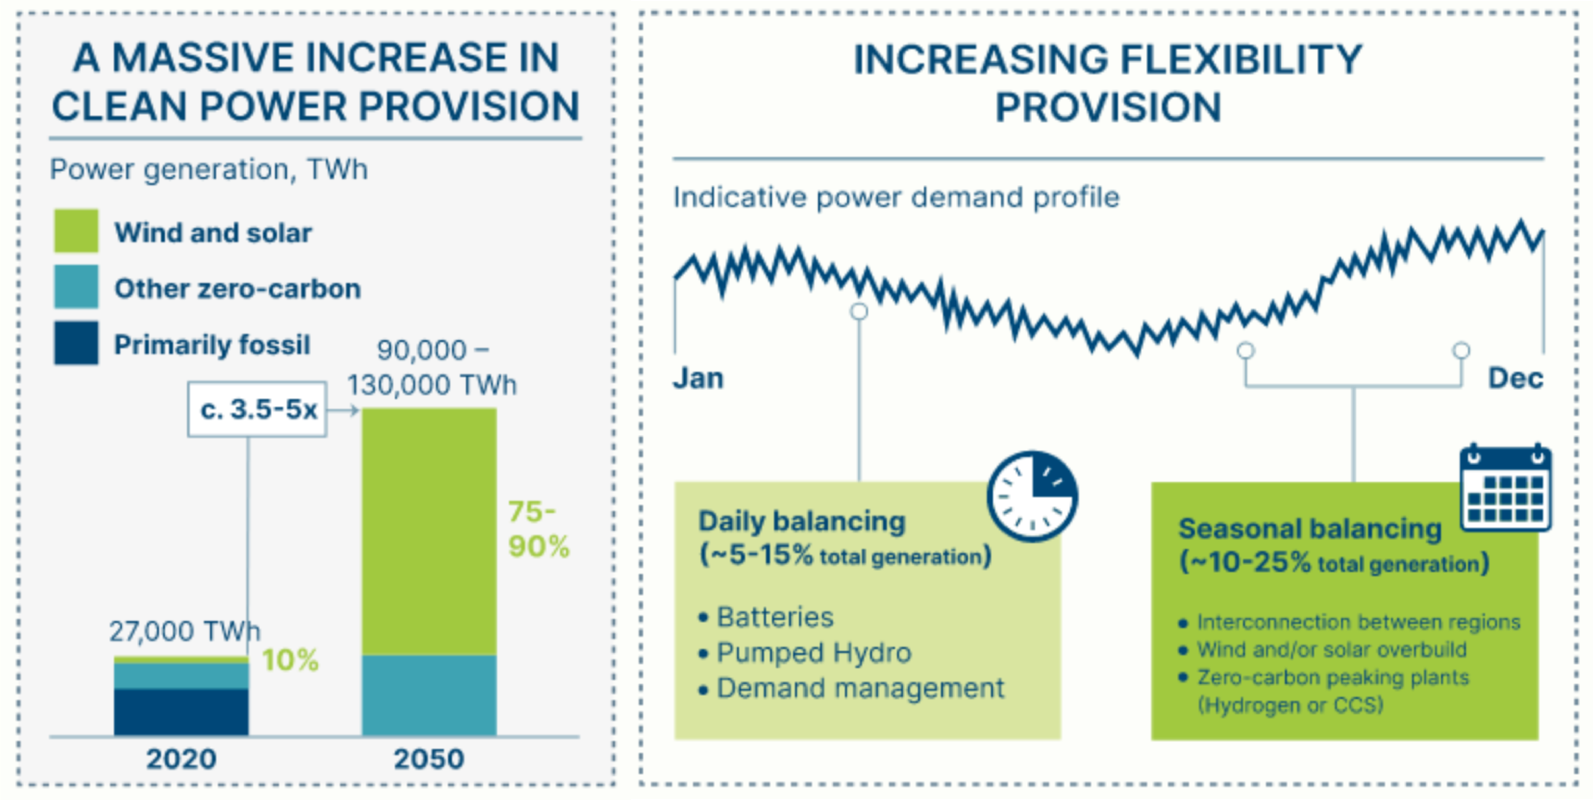 Renewables must grow massively to keep up with increasing demand while meeting decarbonization goals. Their variability will require greater system flexibility. Source: Energy Transitions Commission